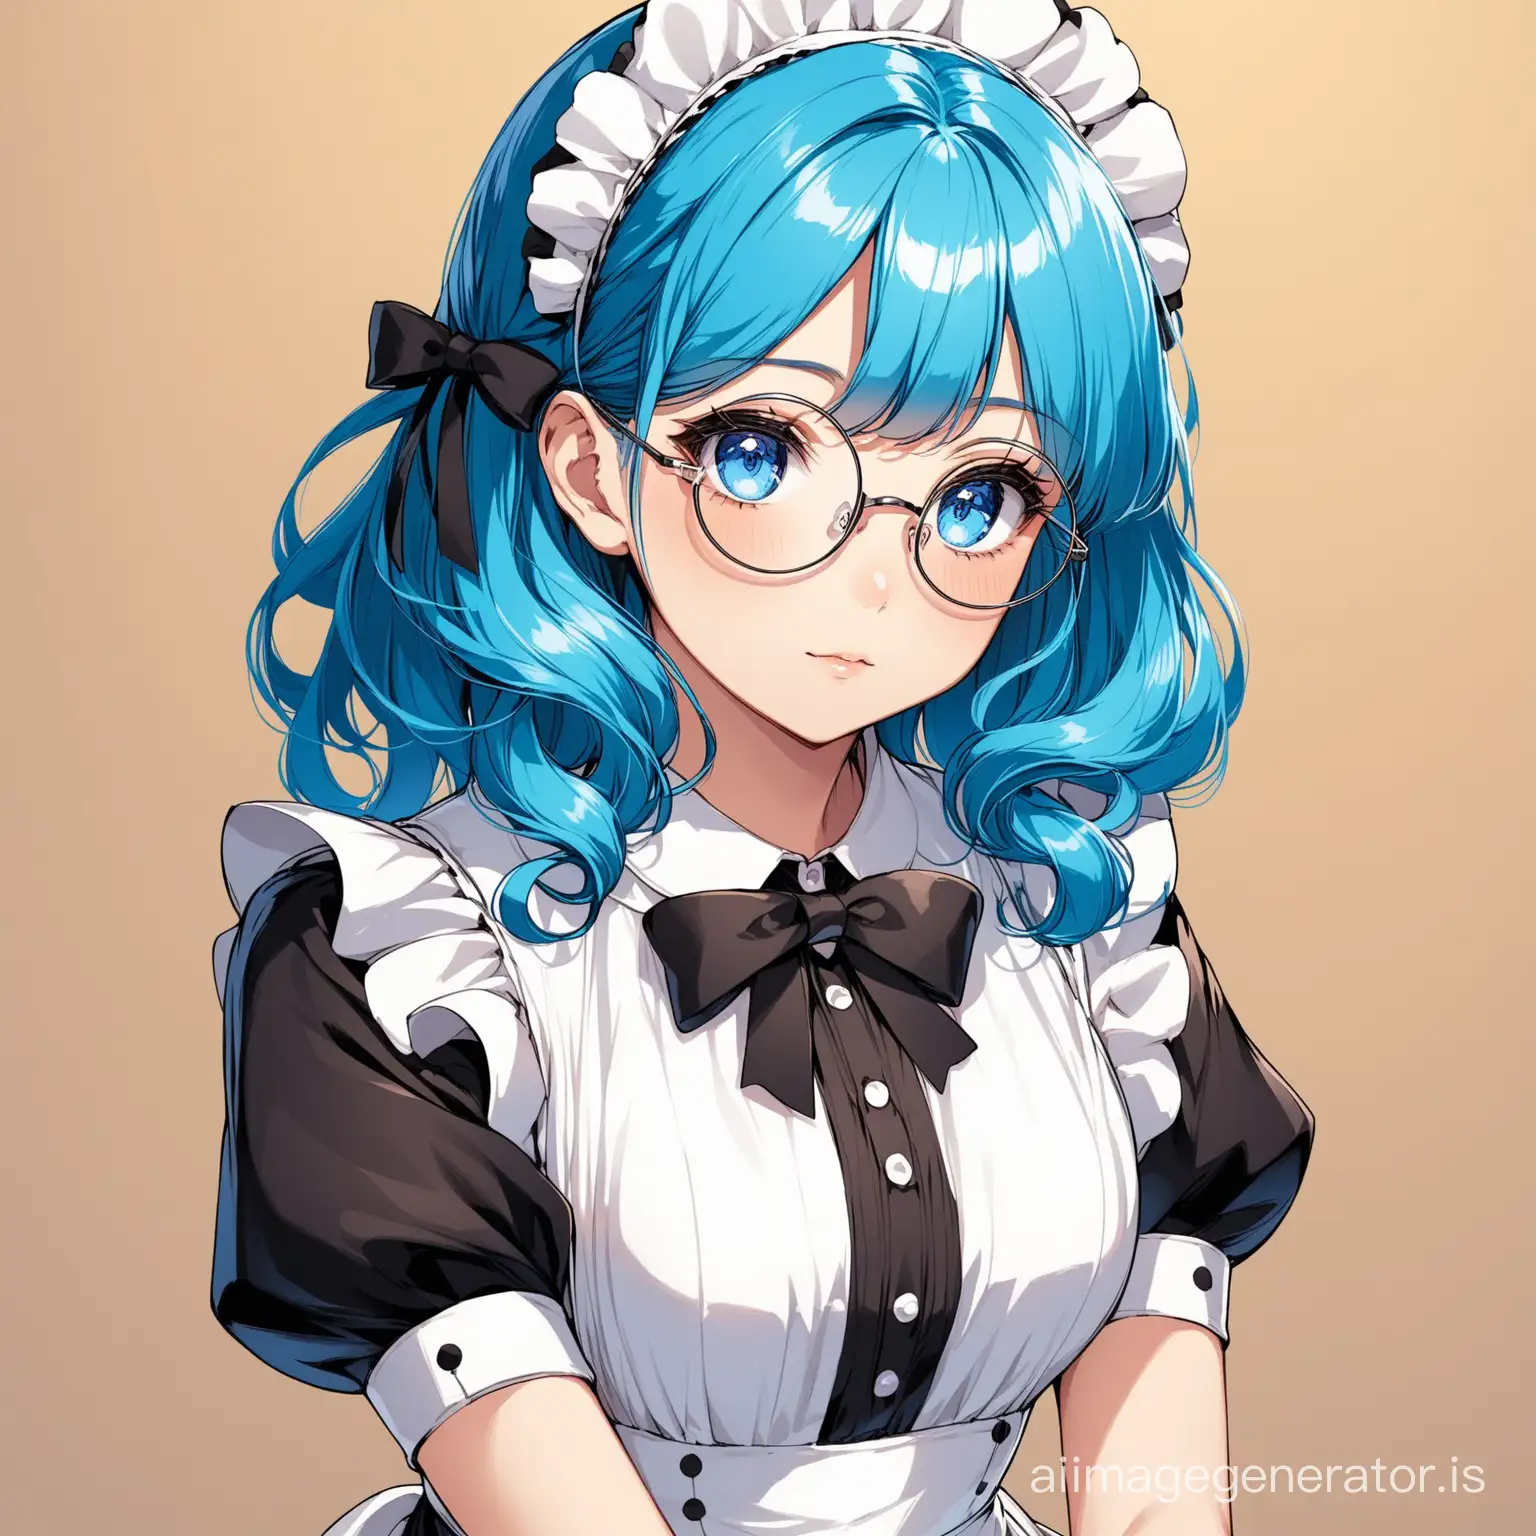 BlueHaired-Maid-in-Round-Glasses-with-Curly-Locks